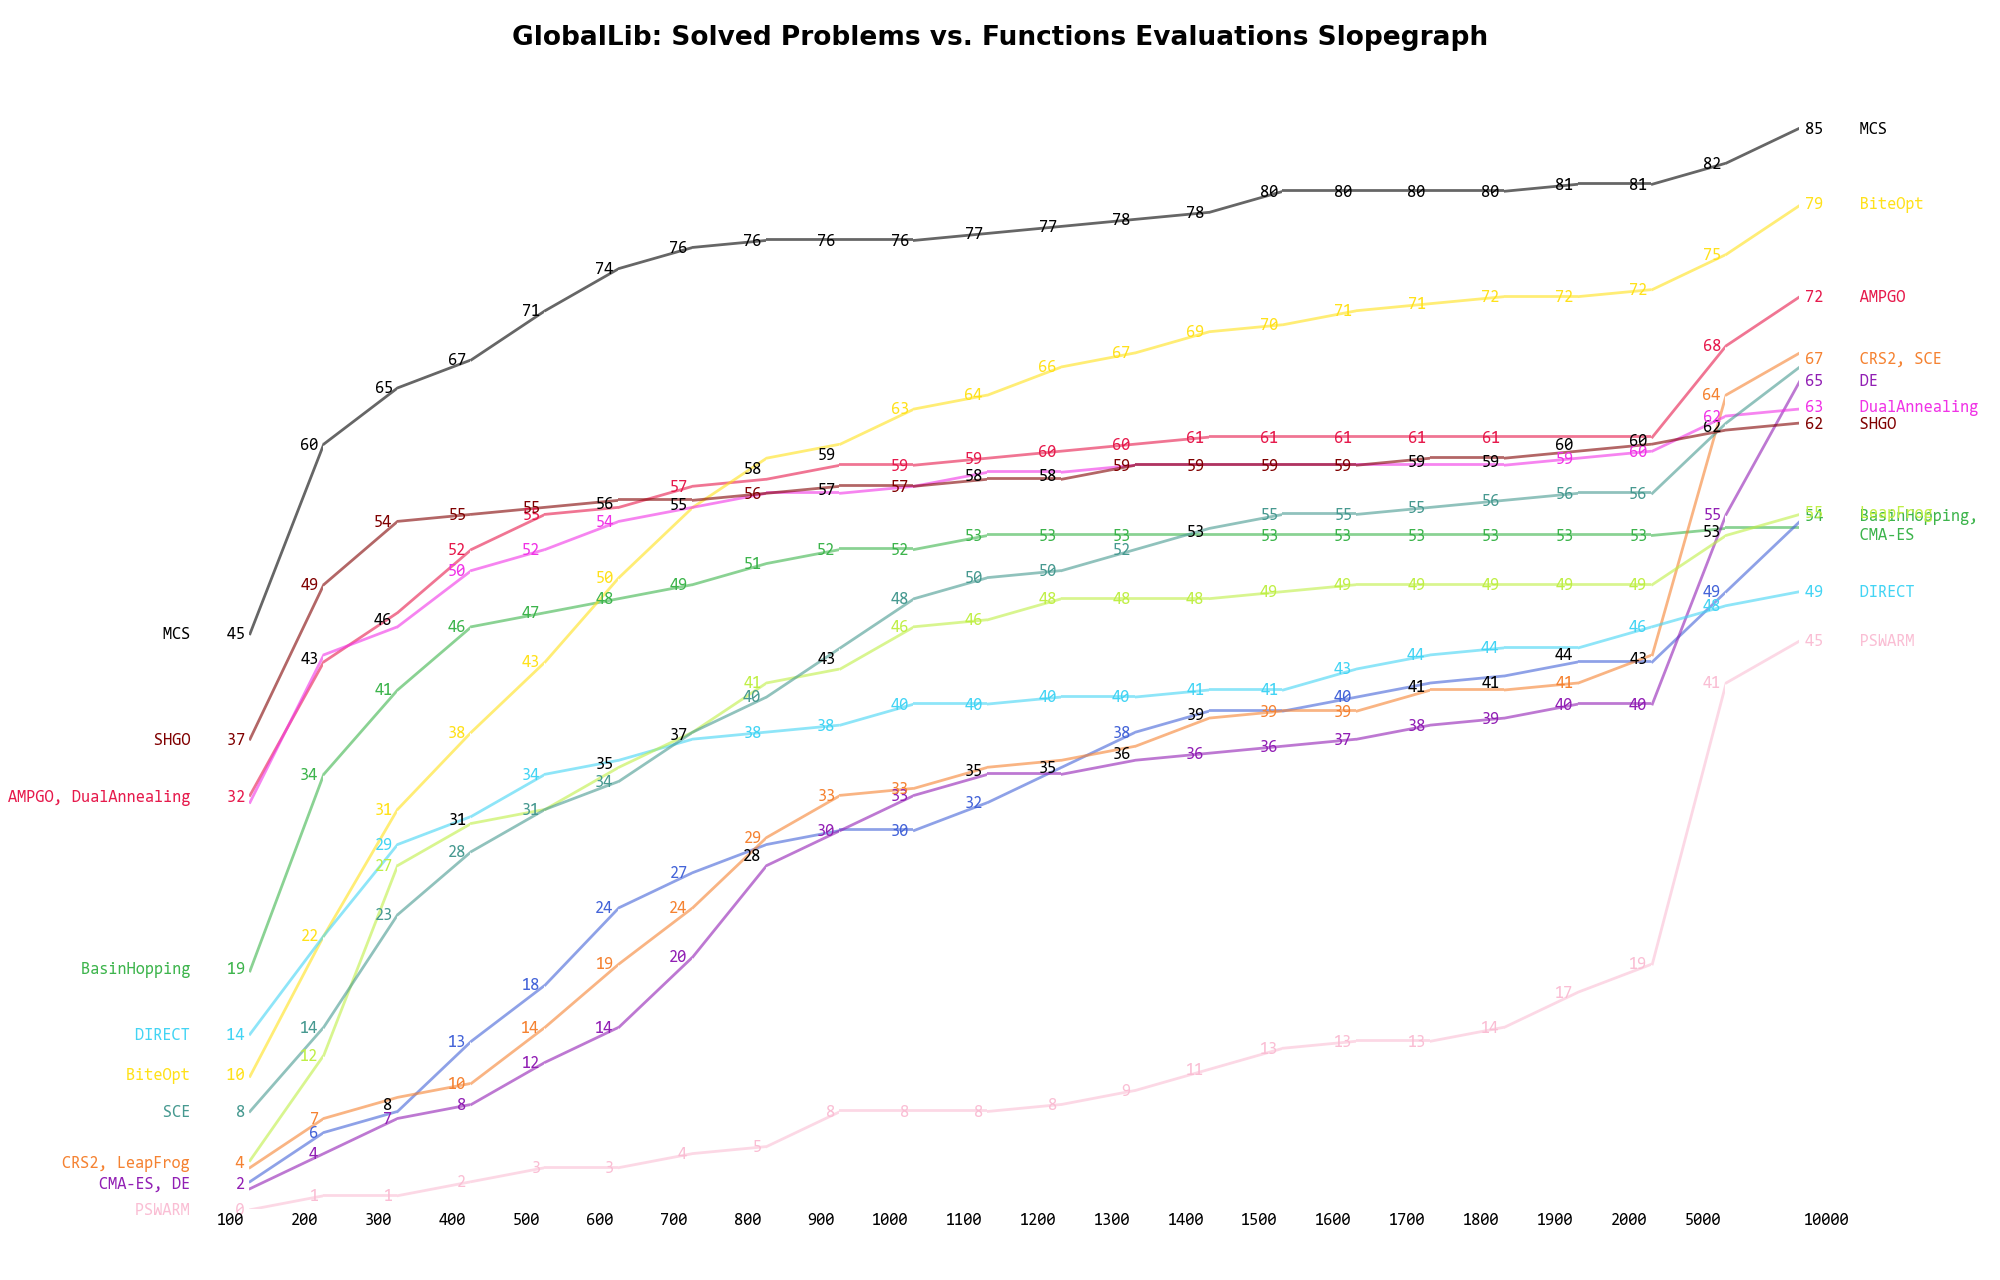 Percentage of problems solved given a fixed number of function evaluations on the GlobalLib test suite